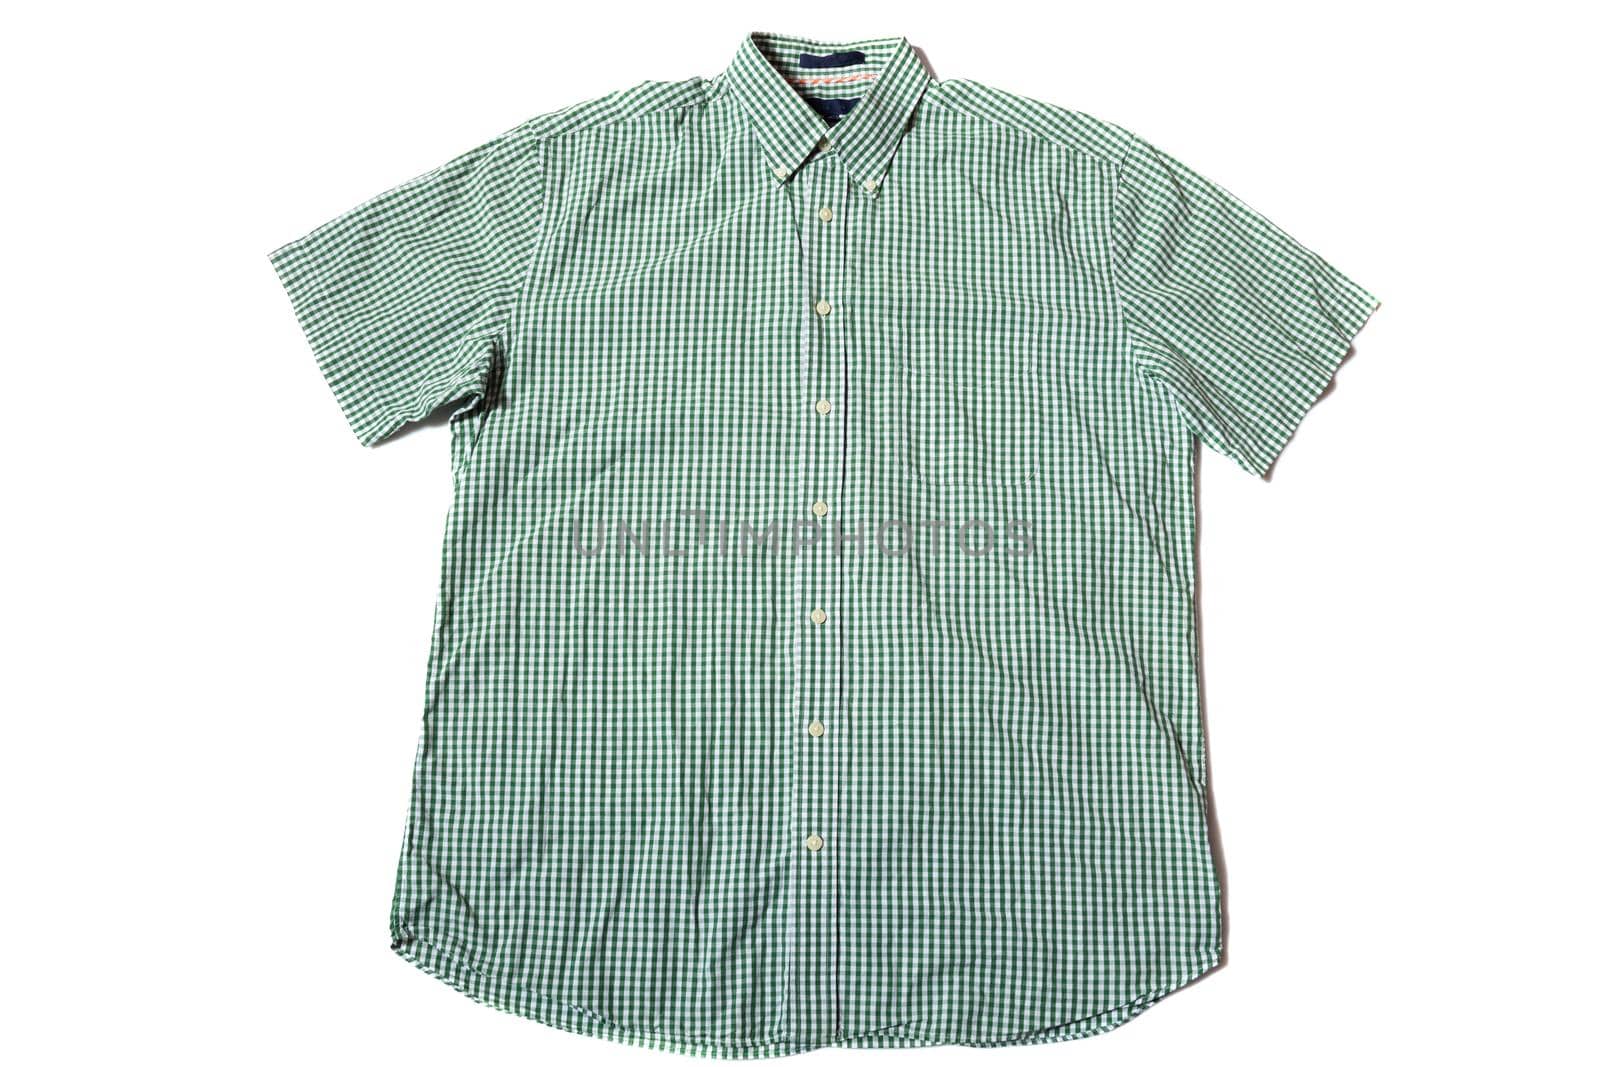 Green Button up short sleeve shirt by AigarsR